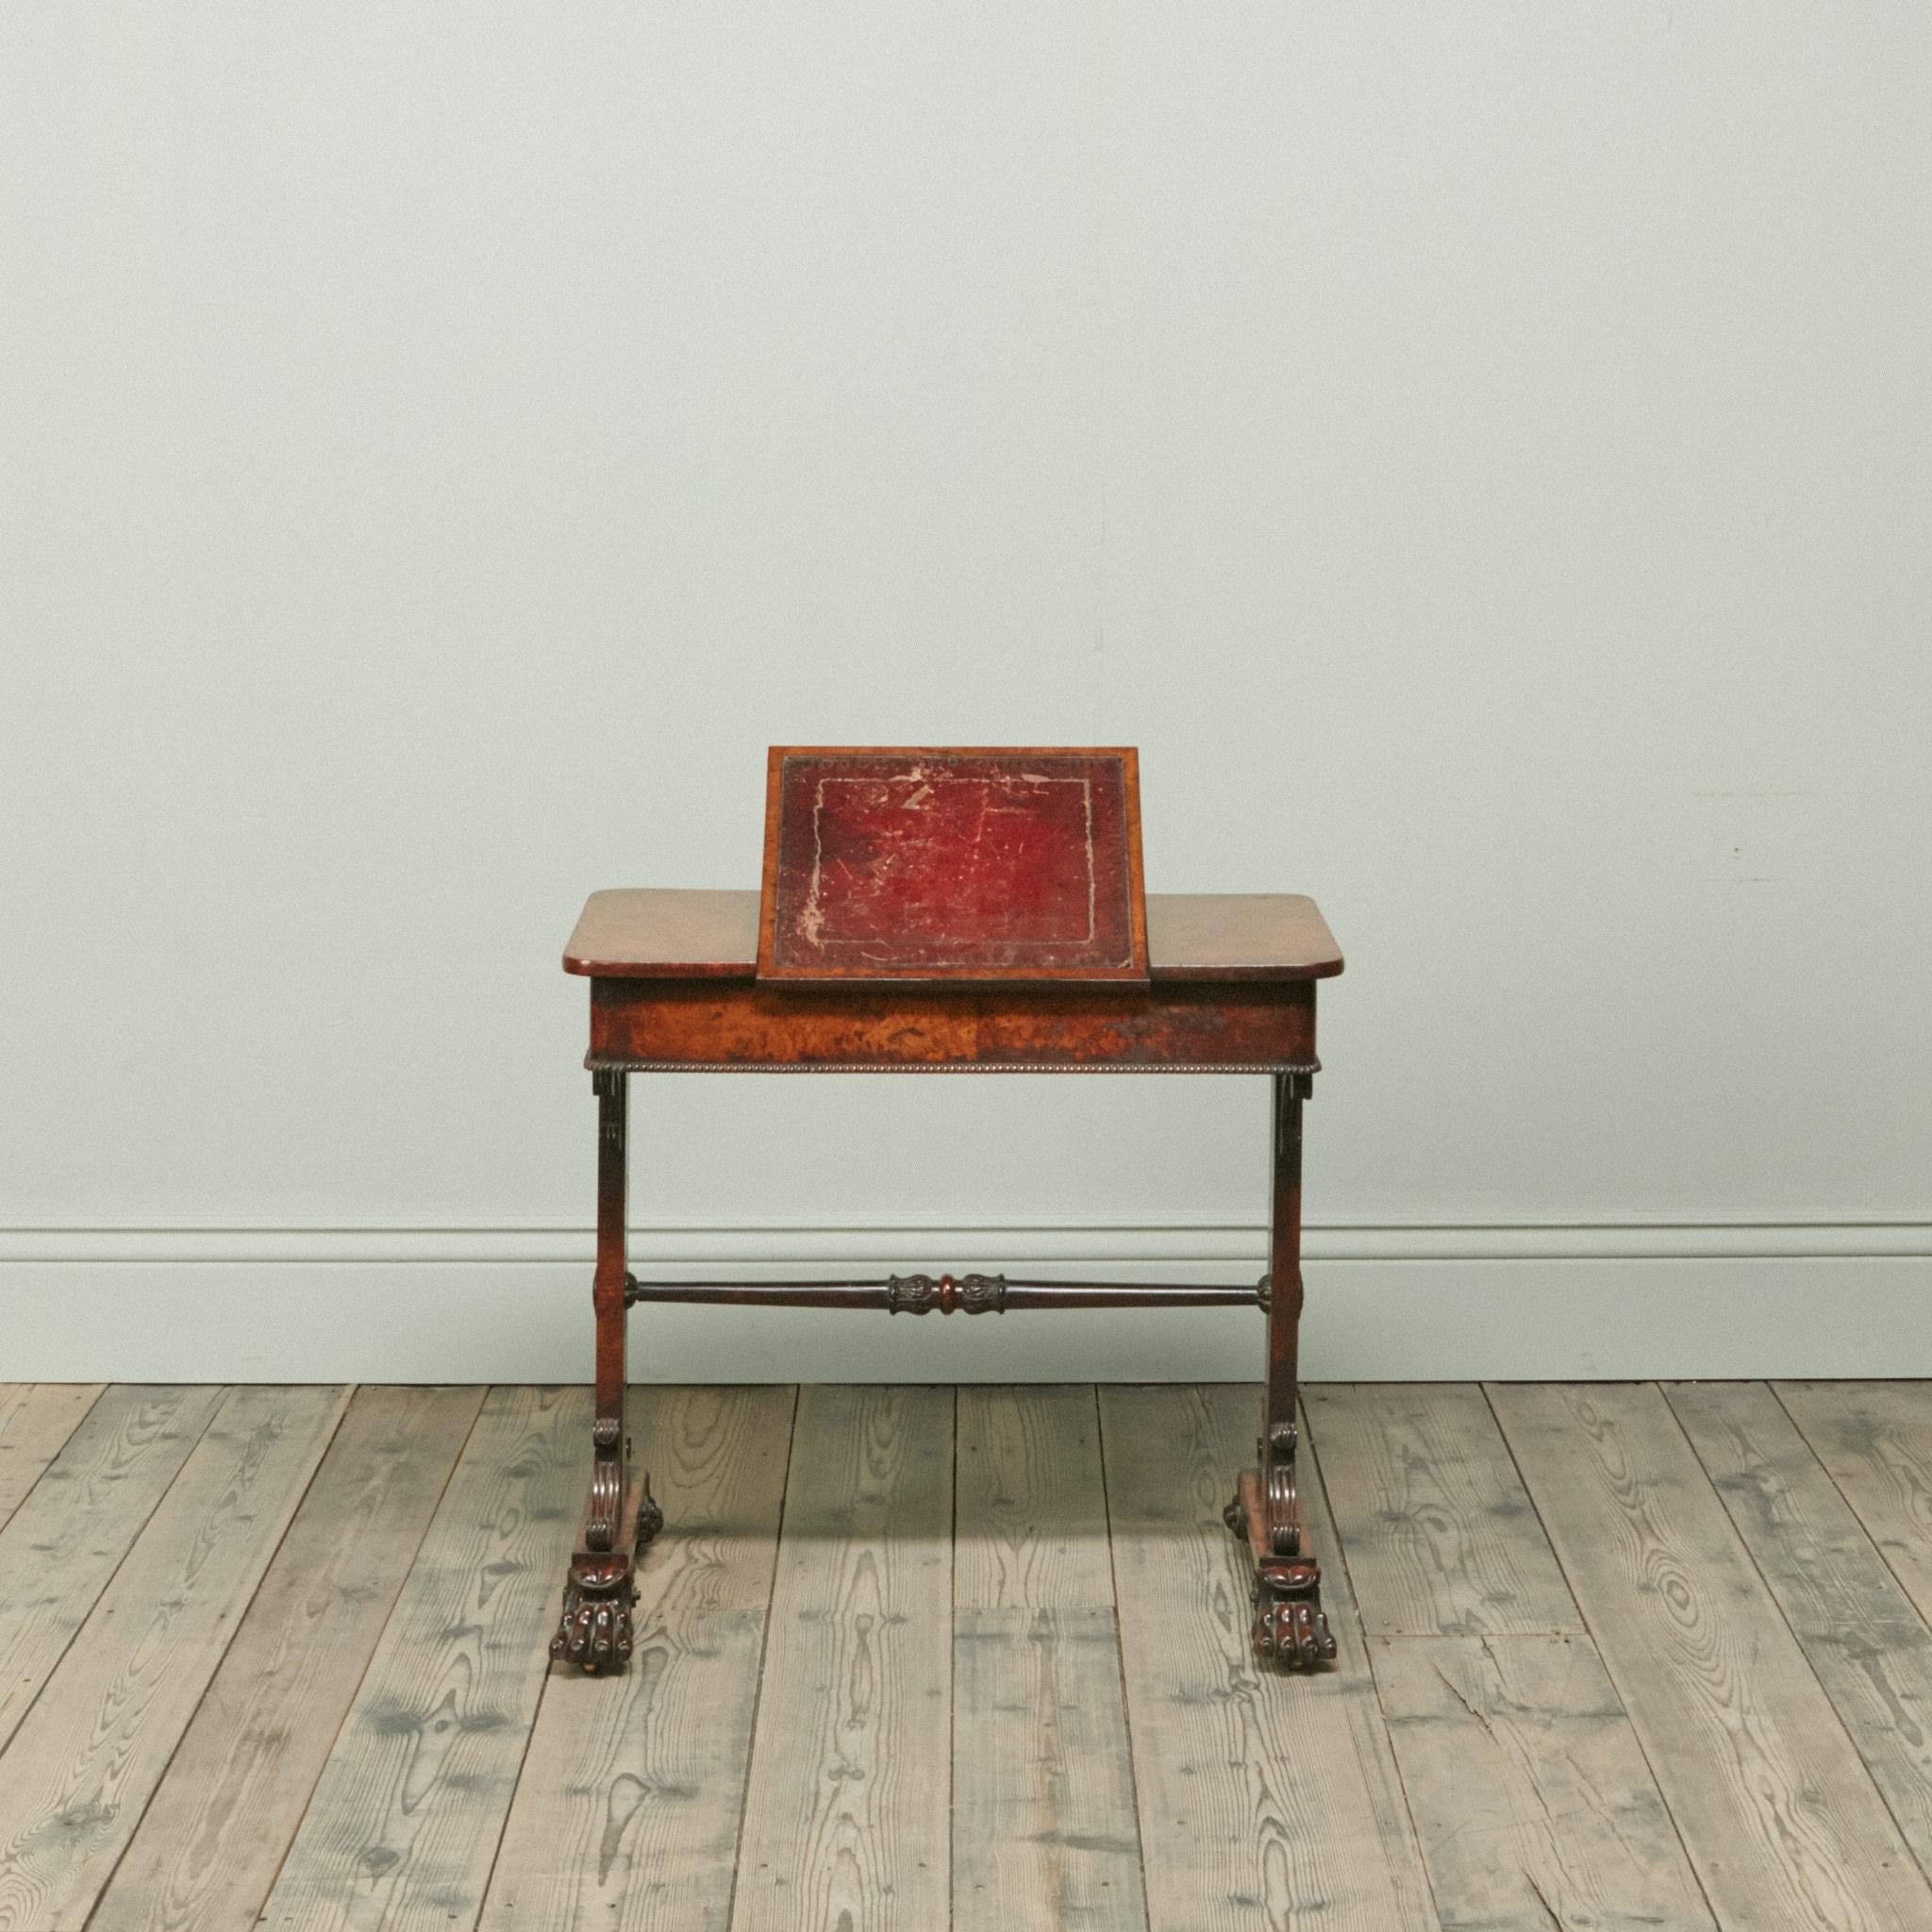 A very fine George IV pollard oak writing table, with original Moroccan red leather and exceptional patination to the oak. In the manner of George Smith. The Tooled red leather writing slope with easel support flanked by hinged compartments on